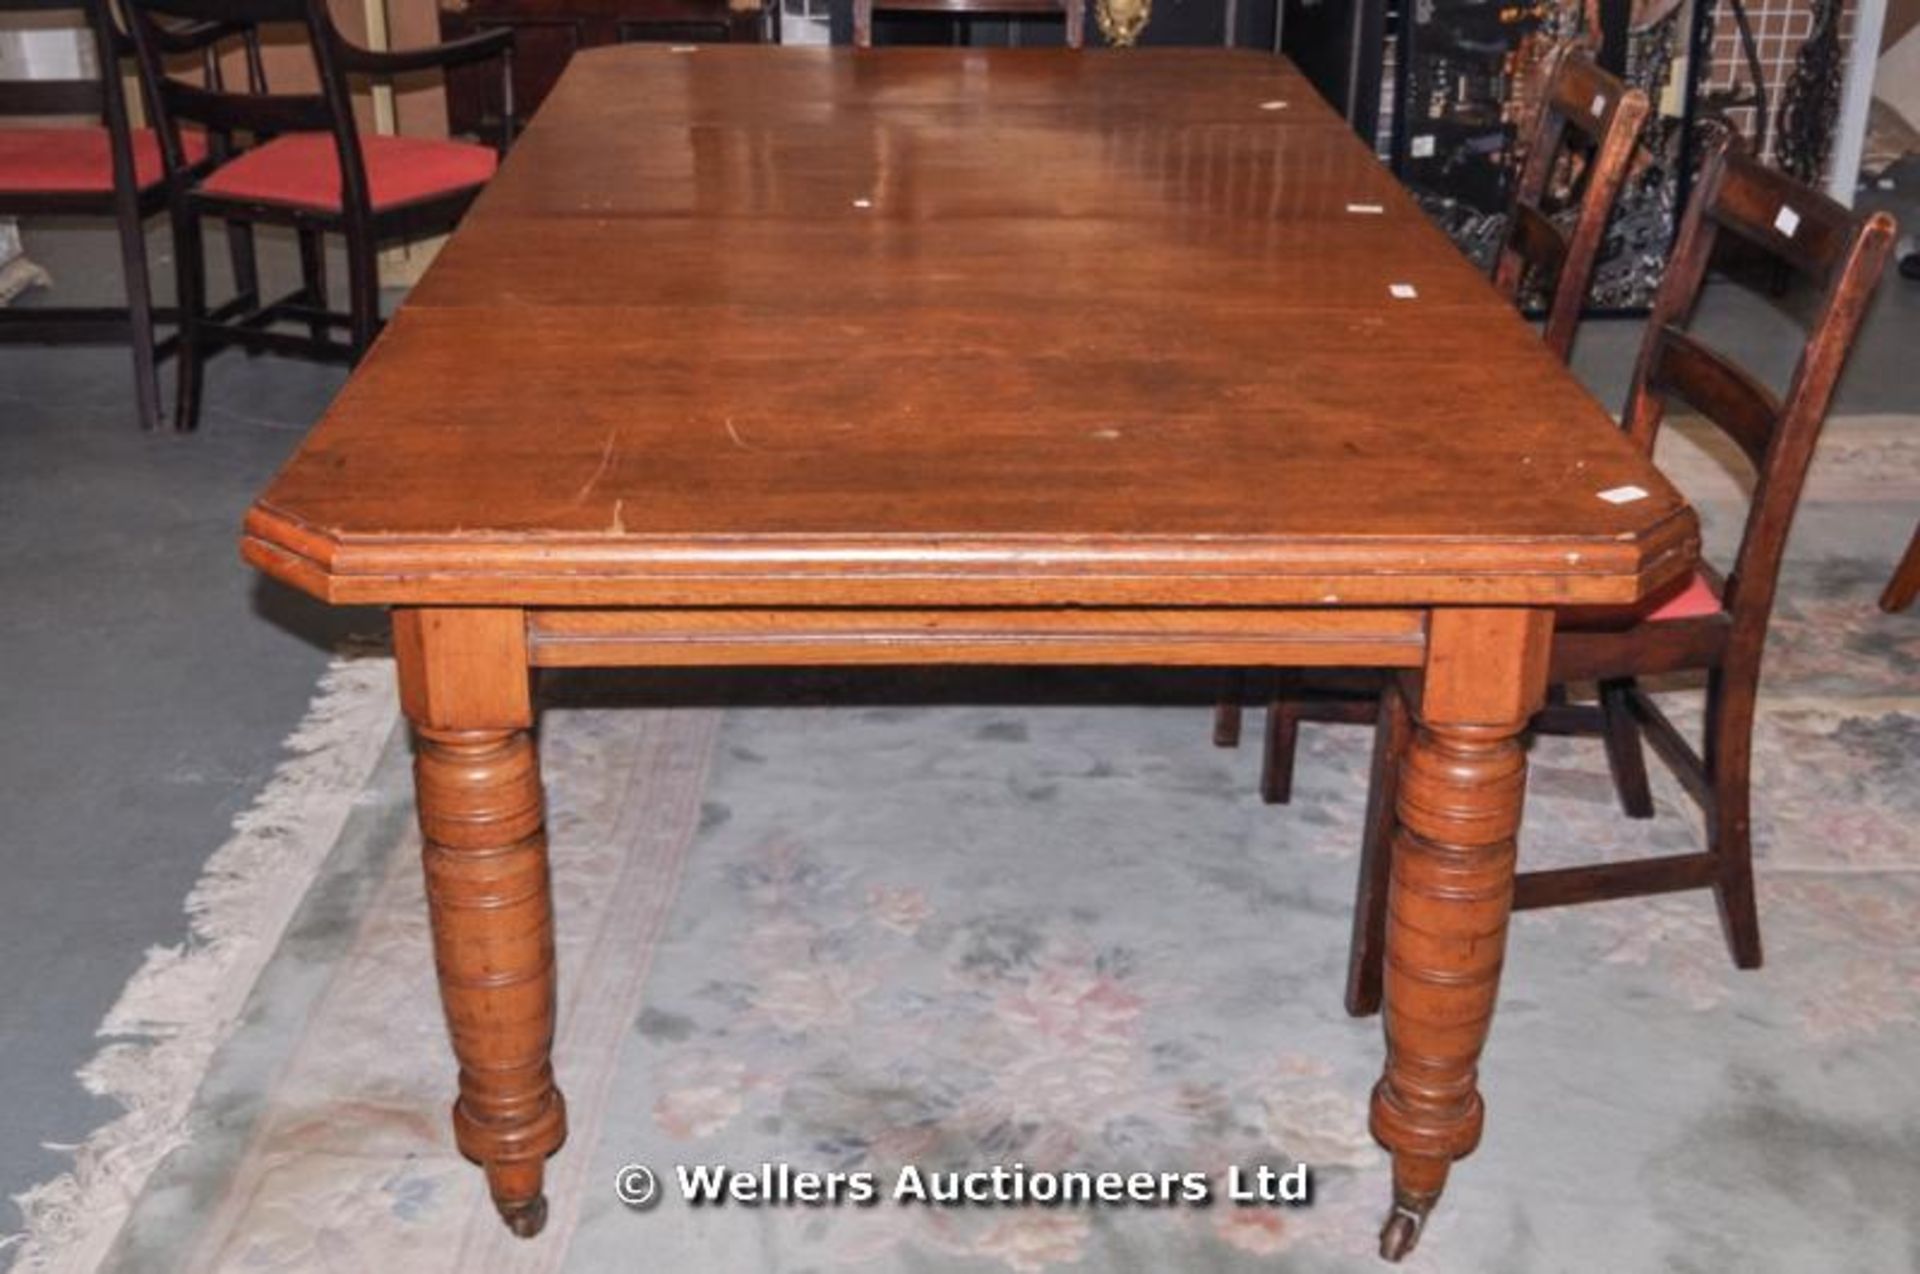 An oak Victorian wind-out dining table with two extra leaves, canted corners